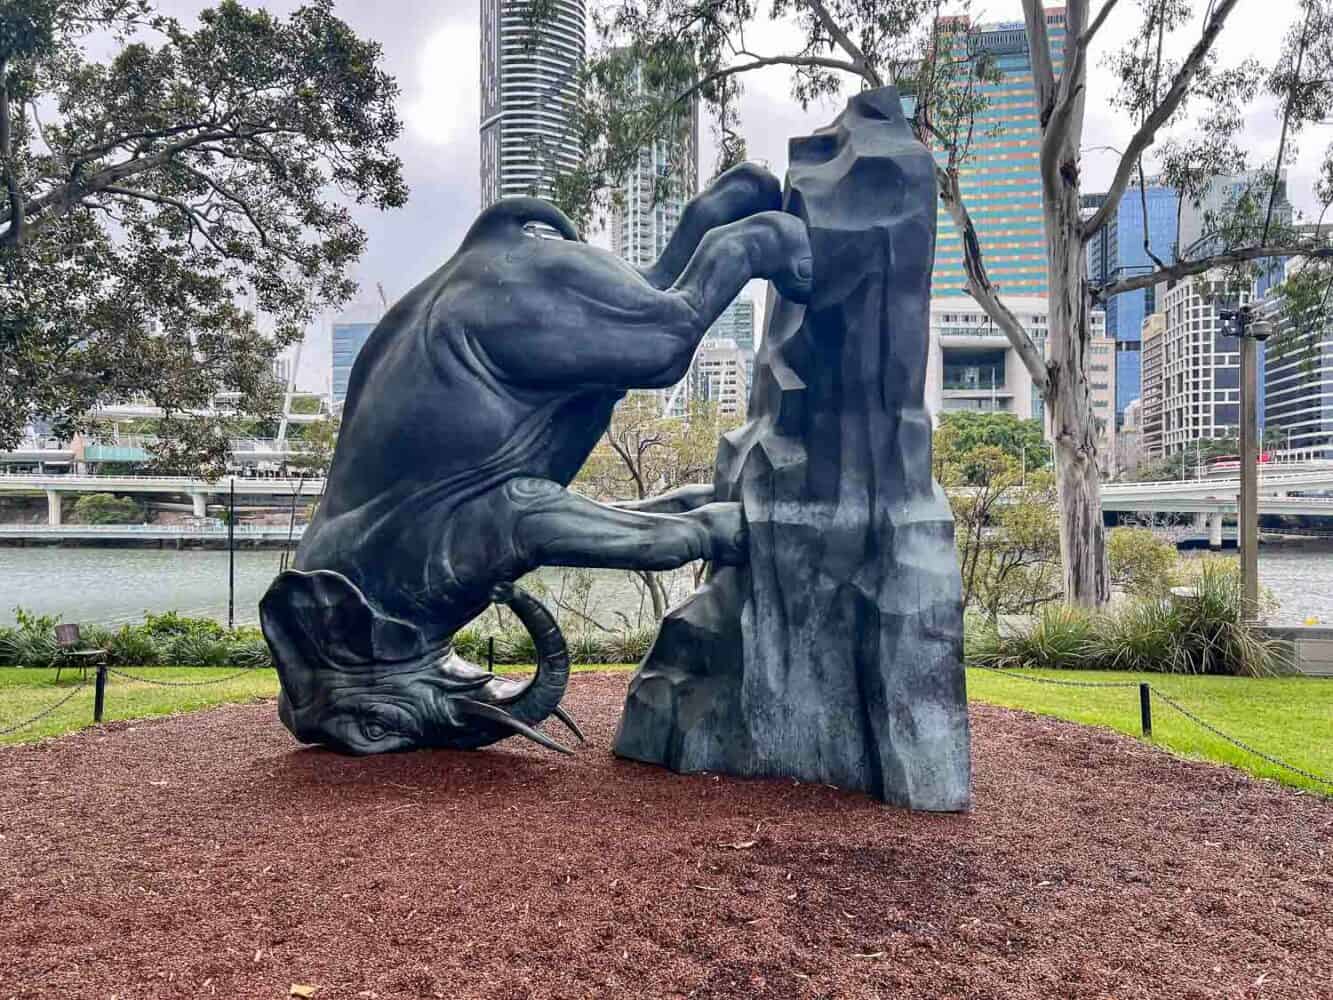 The World Turns sculpture by Michael Parekowhai on the lawns of the Gallery of Modern Art, Brisbane, Australia